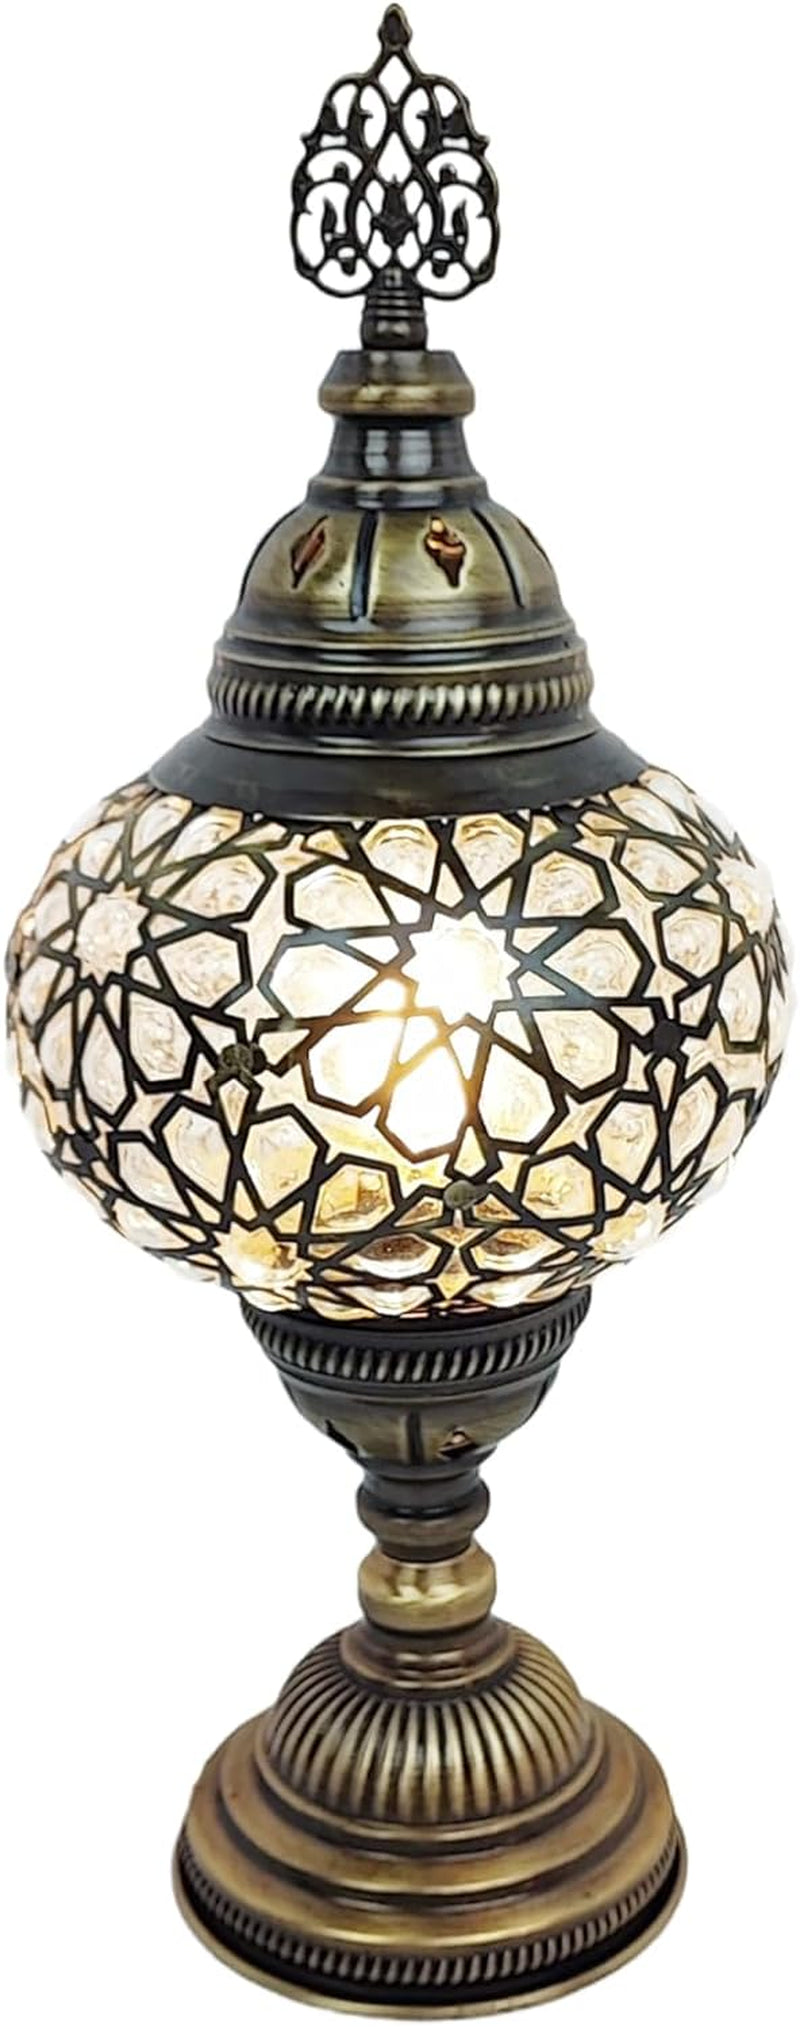 Angora Elif Small Decorative Table Lamp | 100% Handmade in Turkey, Blown Glass, Mediterranean, Turkish Moroccan Mosaic Table Lamps, Vintage Desk Lamps | 13.38 Inches Tall